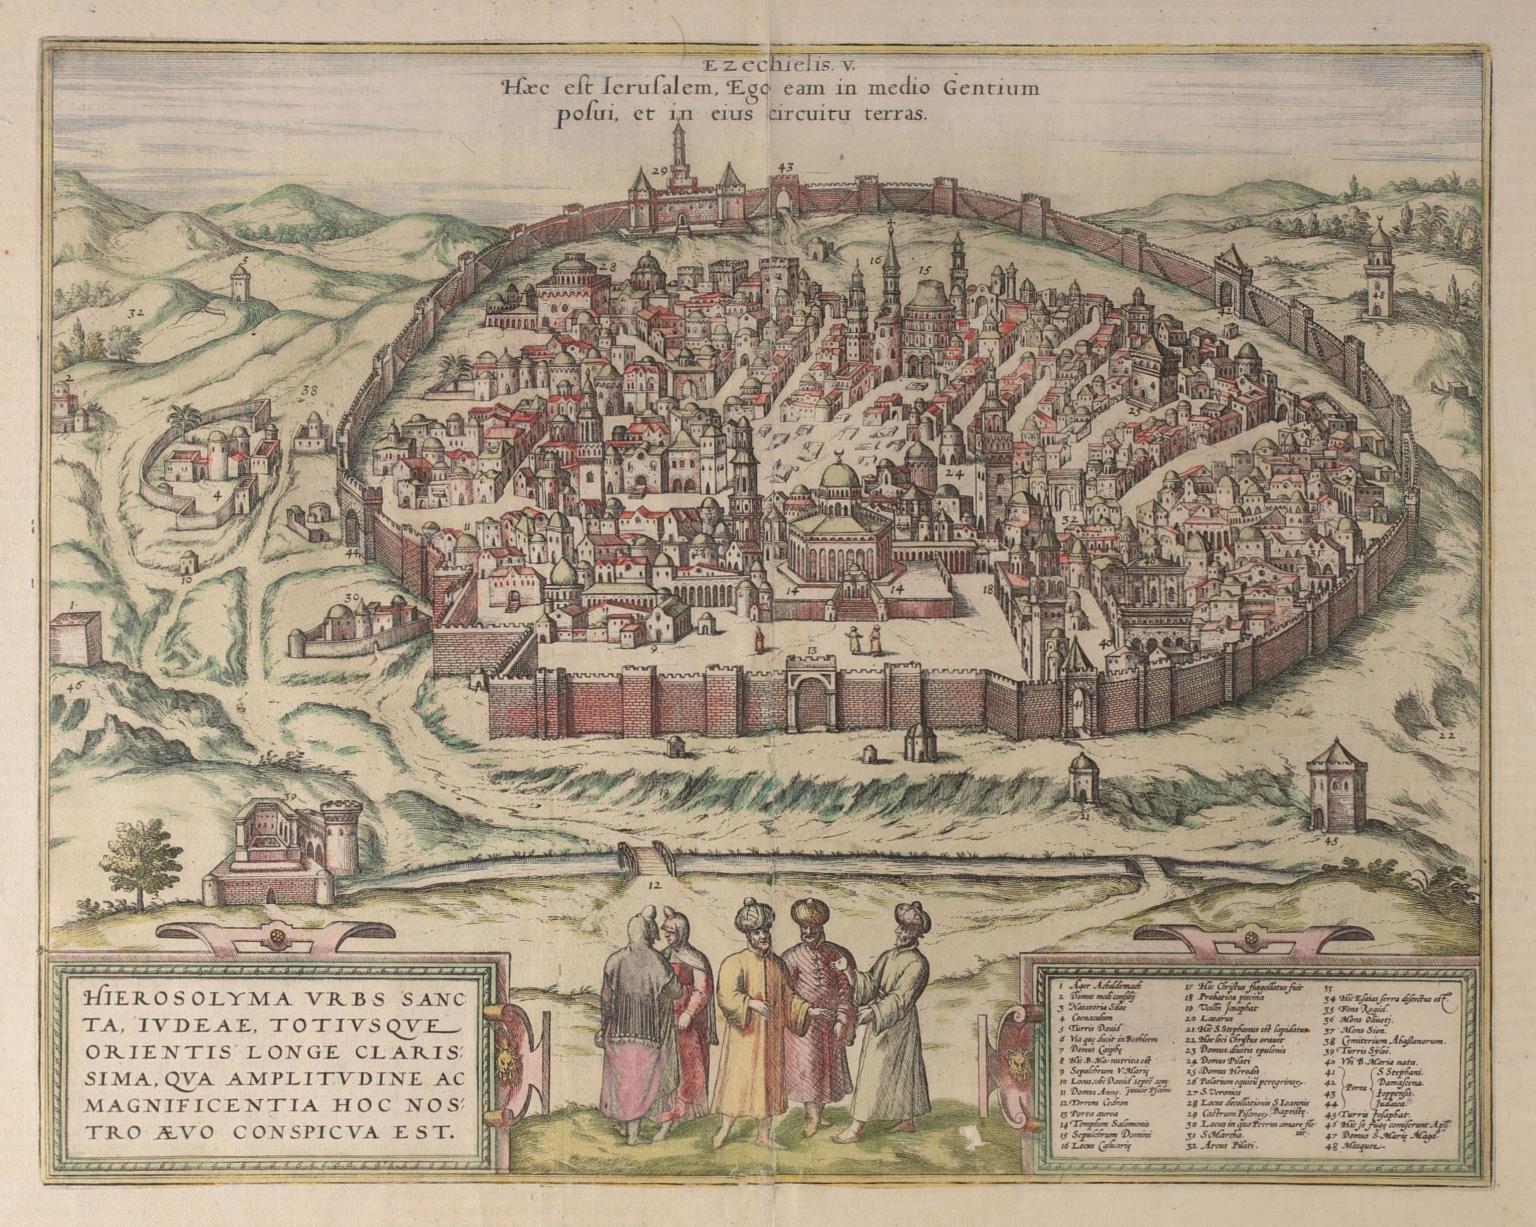 Print of walled city surrounded by hills, and two figures in forefront, with Latin text above and below image. 